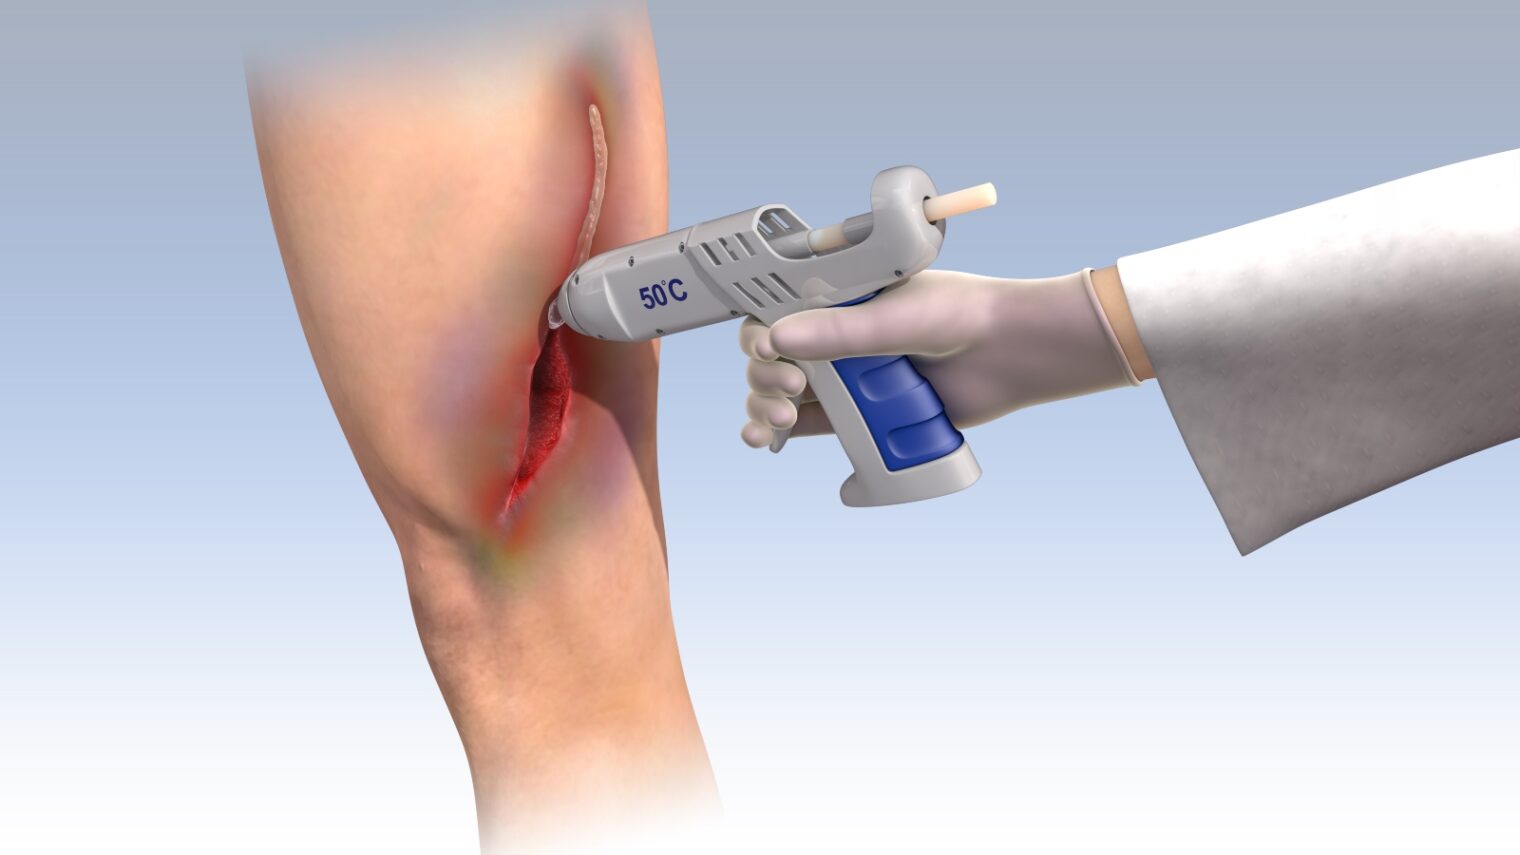 Illustration of the novel medical glue being applied on an incision using a hot-glue gun. Photo courtesy of Technion Spokesperson